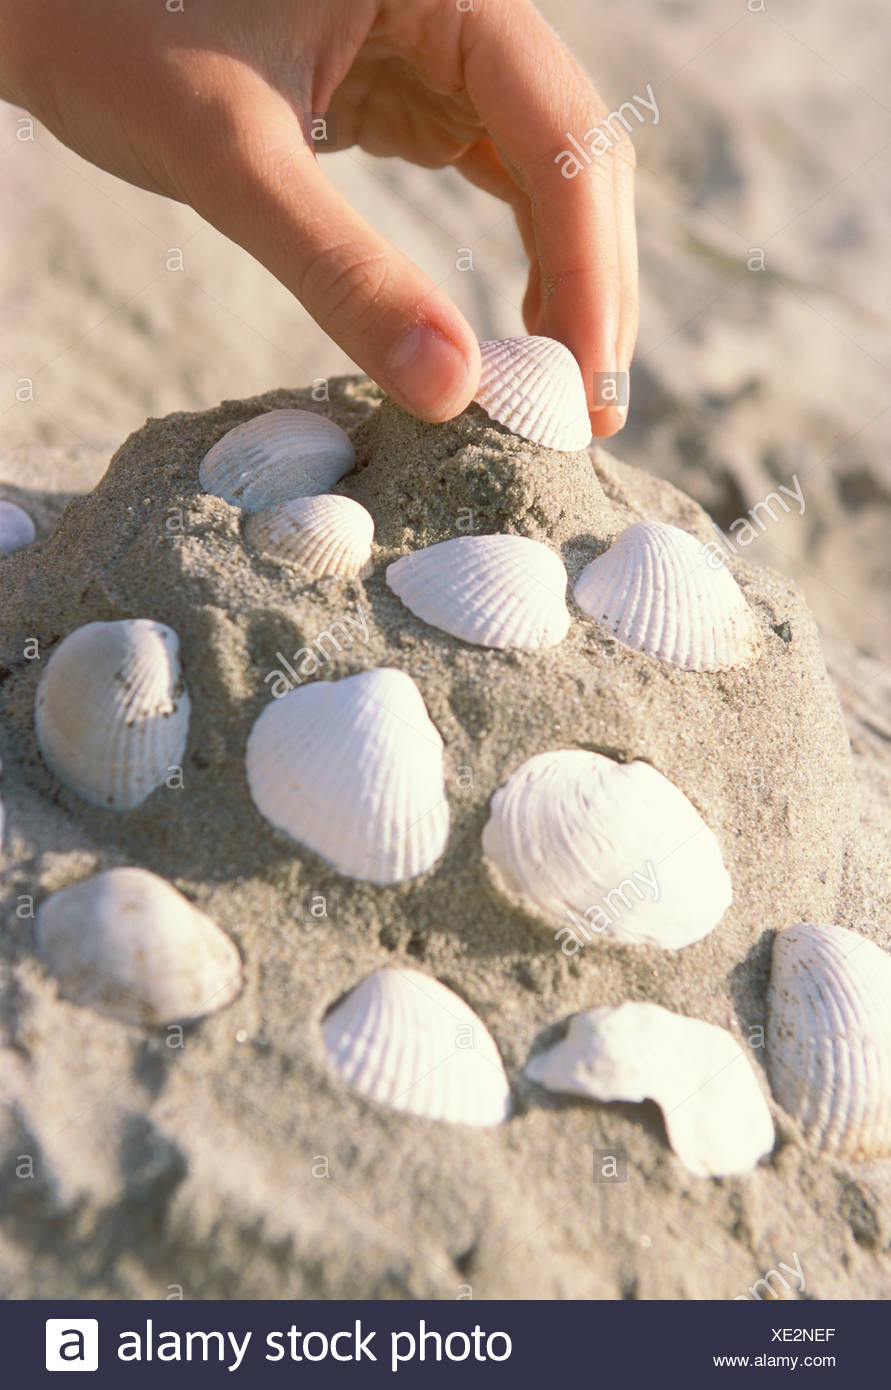 Close Up Of Hand Decorating Sand Castle With Shells On The Beach